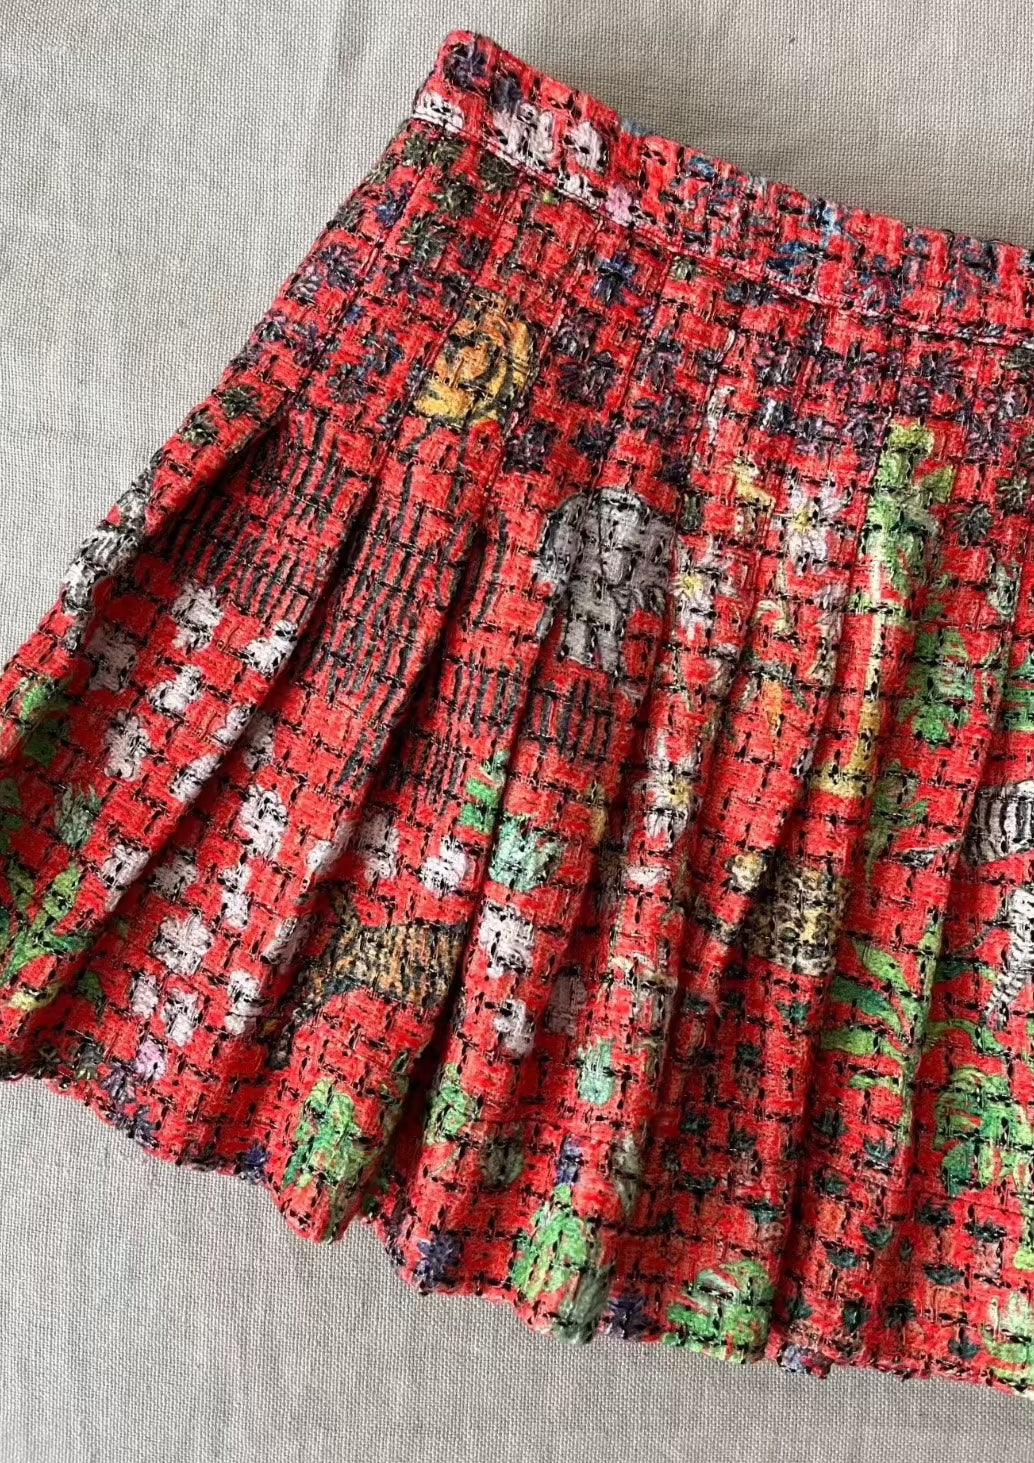 Tweed pleated mini skirt in signature red Fever Dream print, hand-illustrated by designer Olivia Cheng.